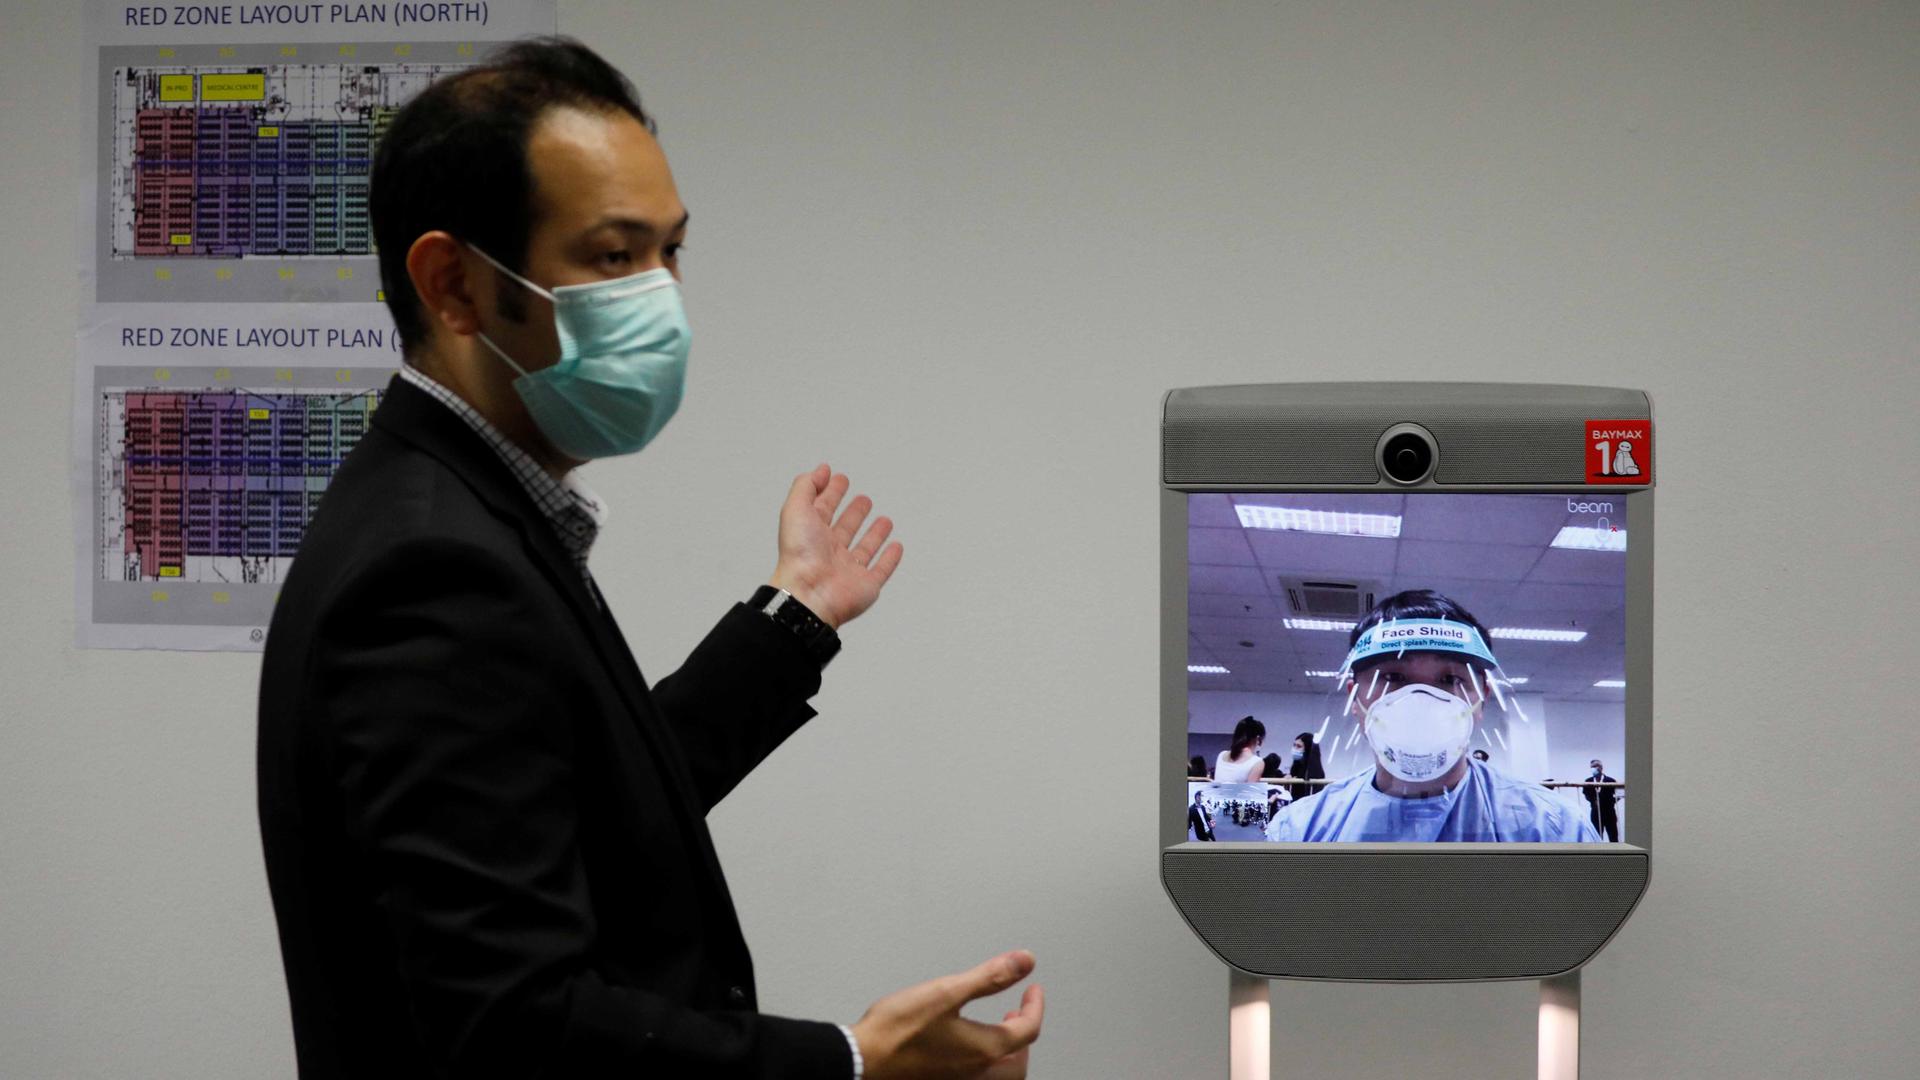 A "telepresence" robot which provides face-to-face medical consultation is pictured at Changi Exhibition Centre which has been repurposed into a community isolation facility that will house recovering or early COVID-19 patients with mild symptoms.